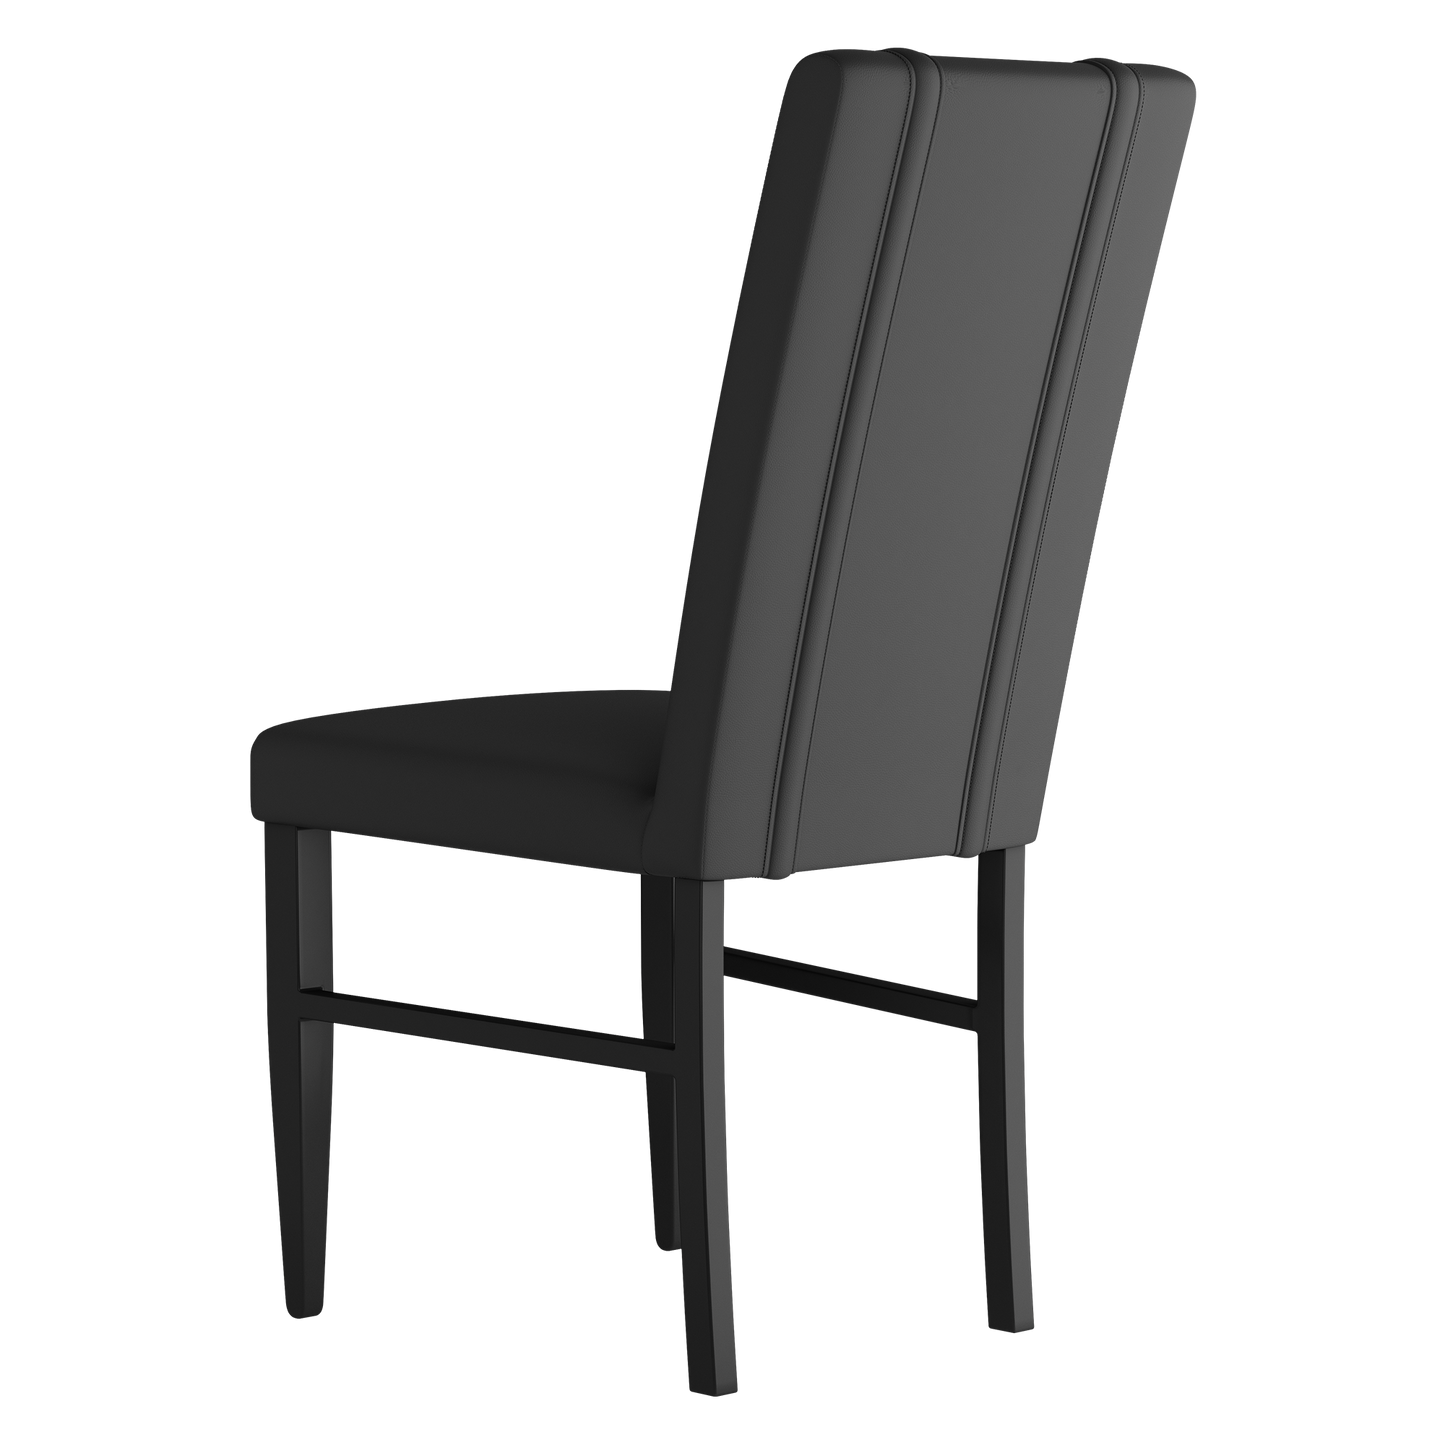 Side Chair 2000 with World's Greatest Dad Logo Panel Set of 2